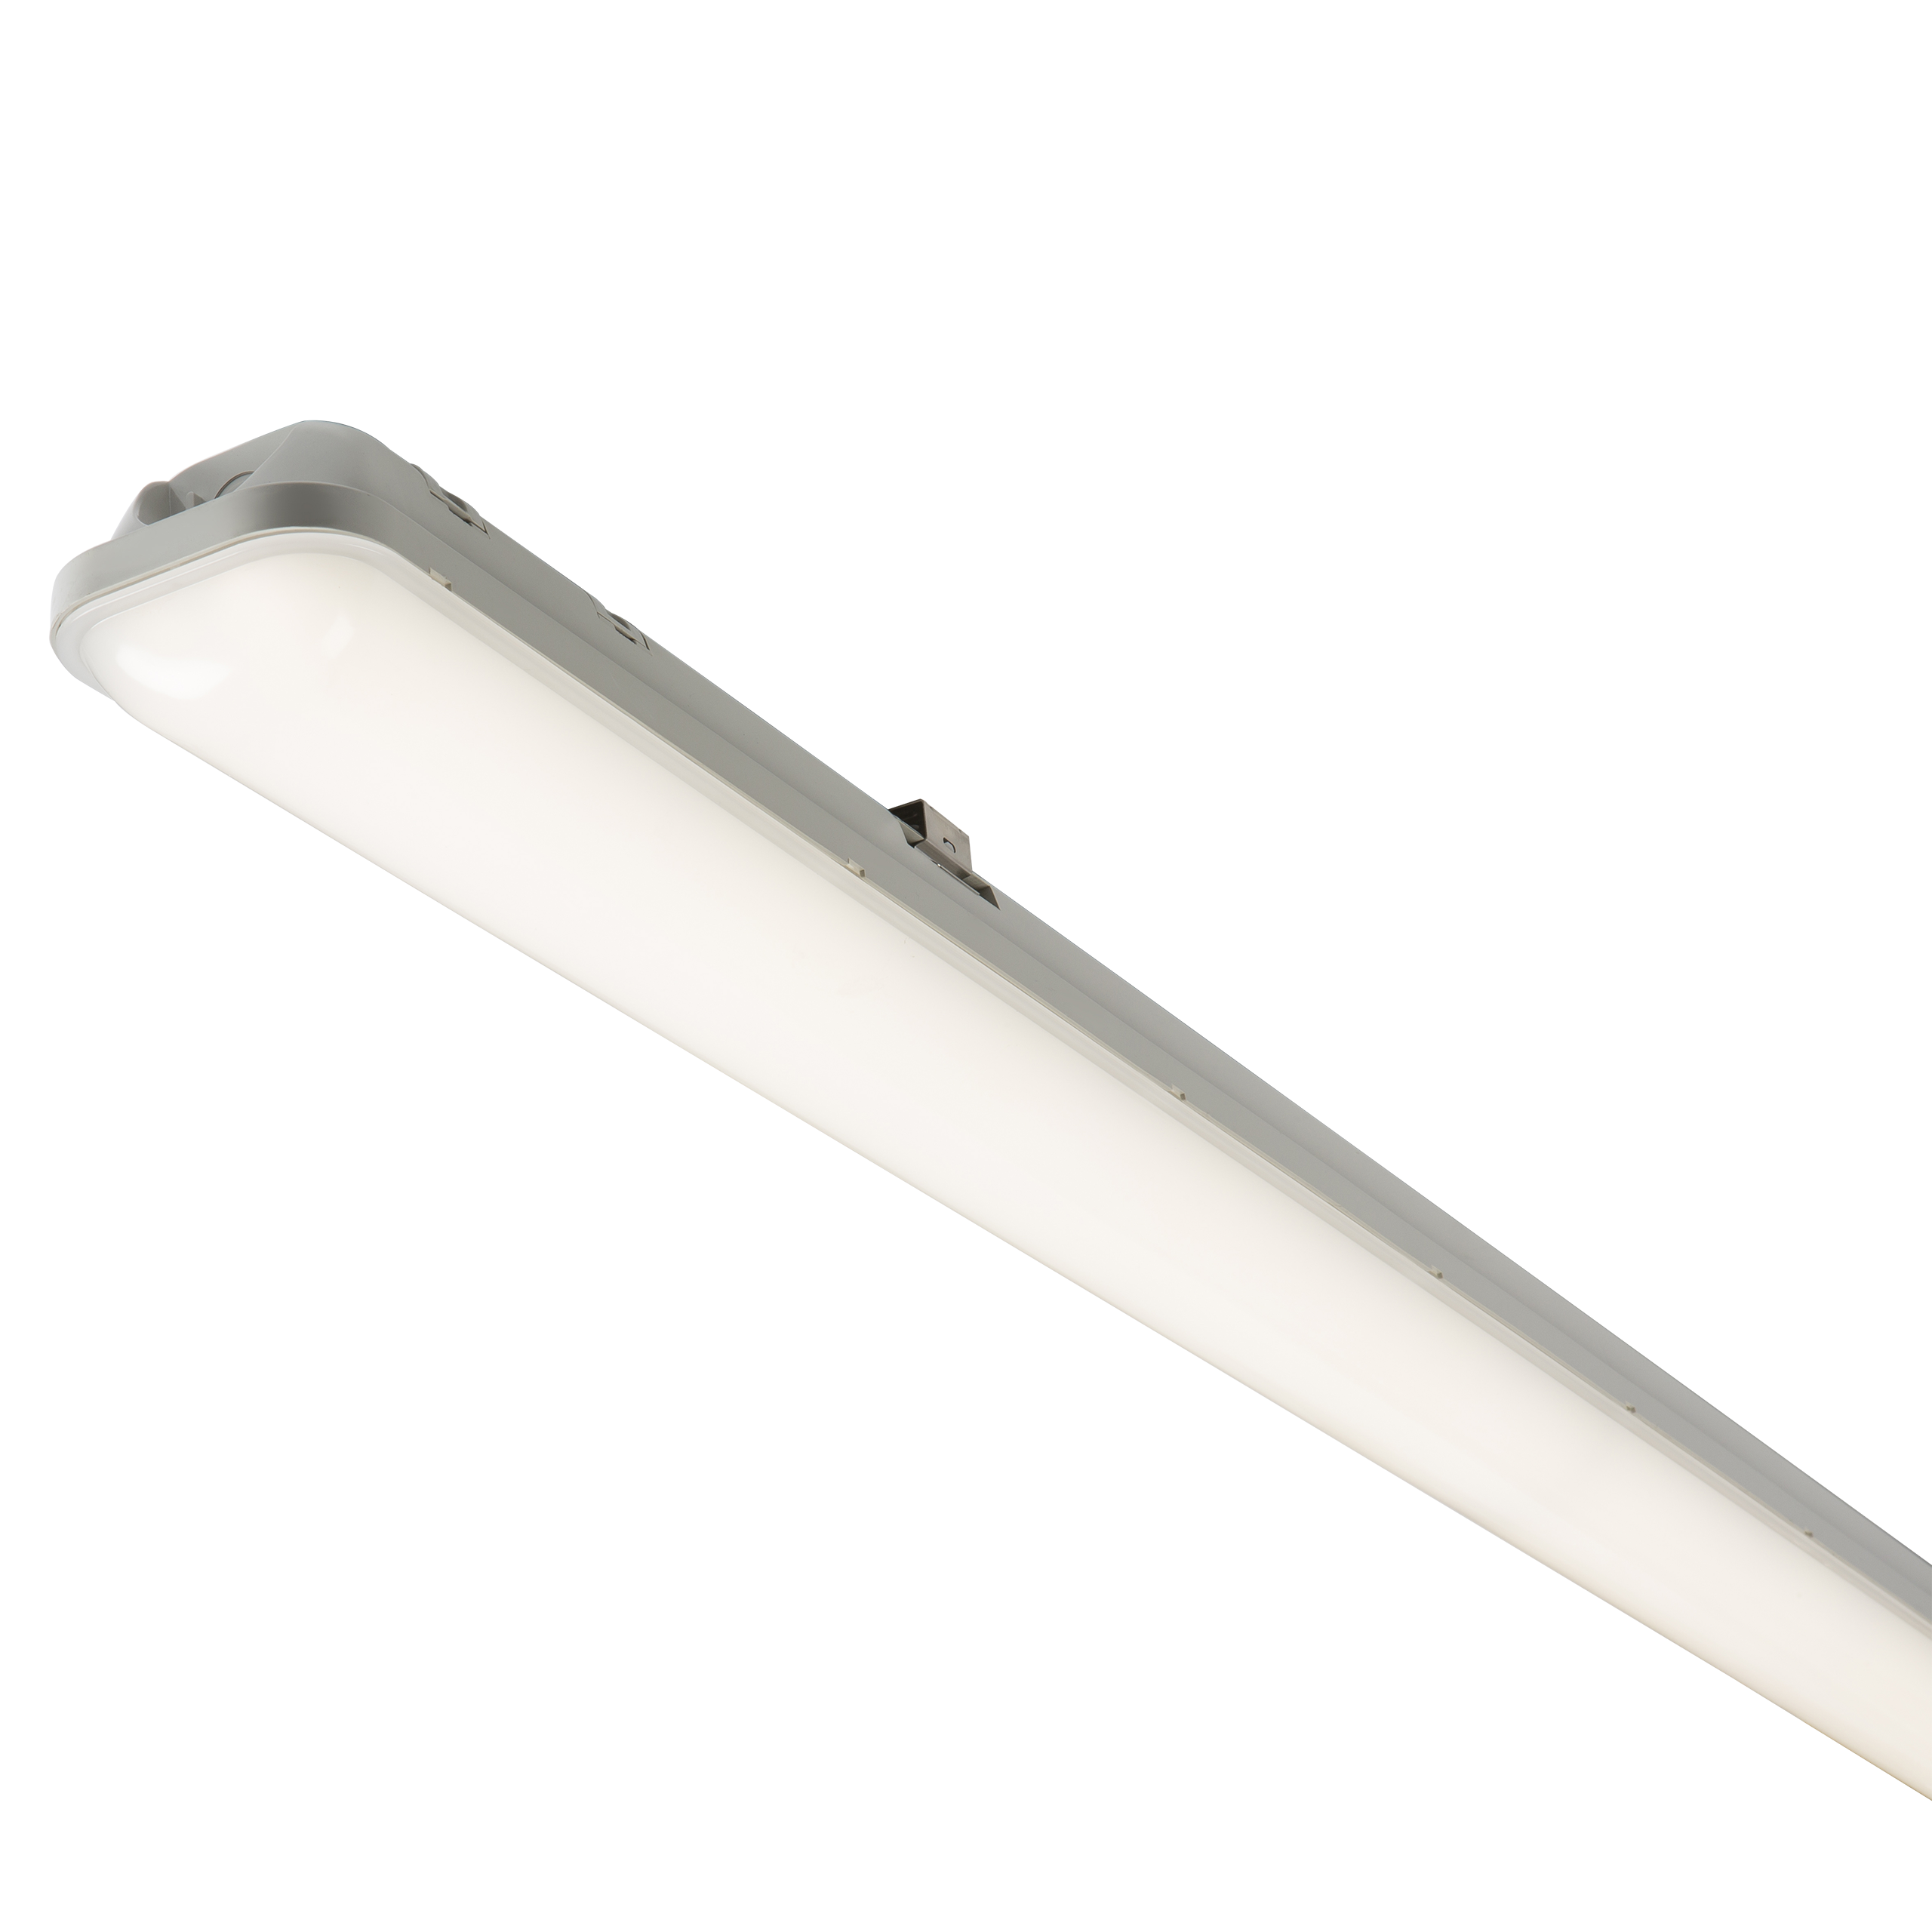 ML Accessories-NCLED60 230V IP65 5ft 60W LED Non-Corrosive Fitting - 1480mm